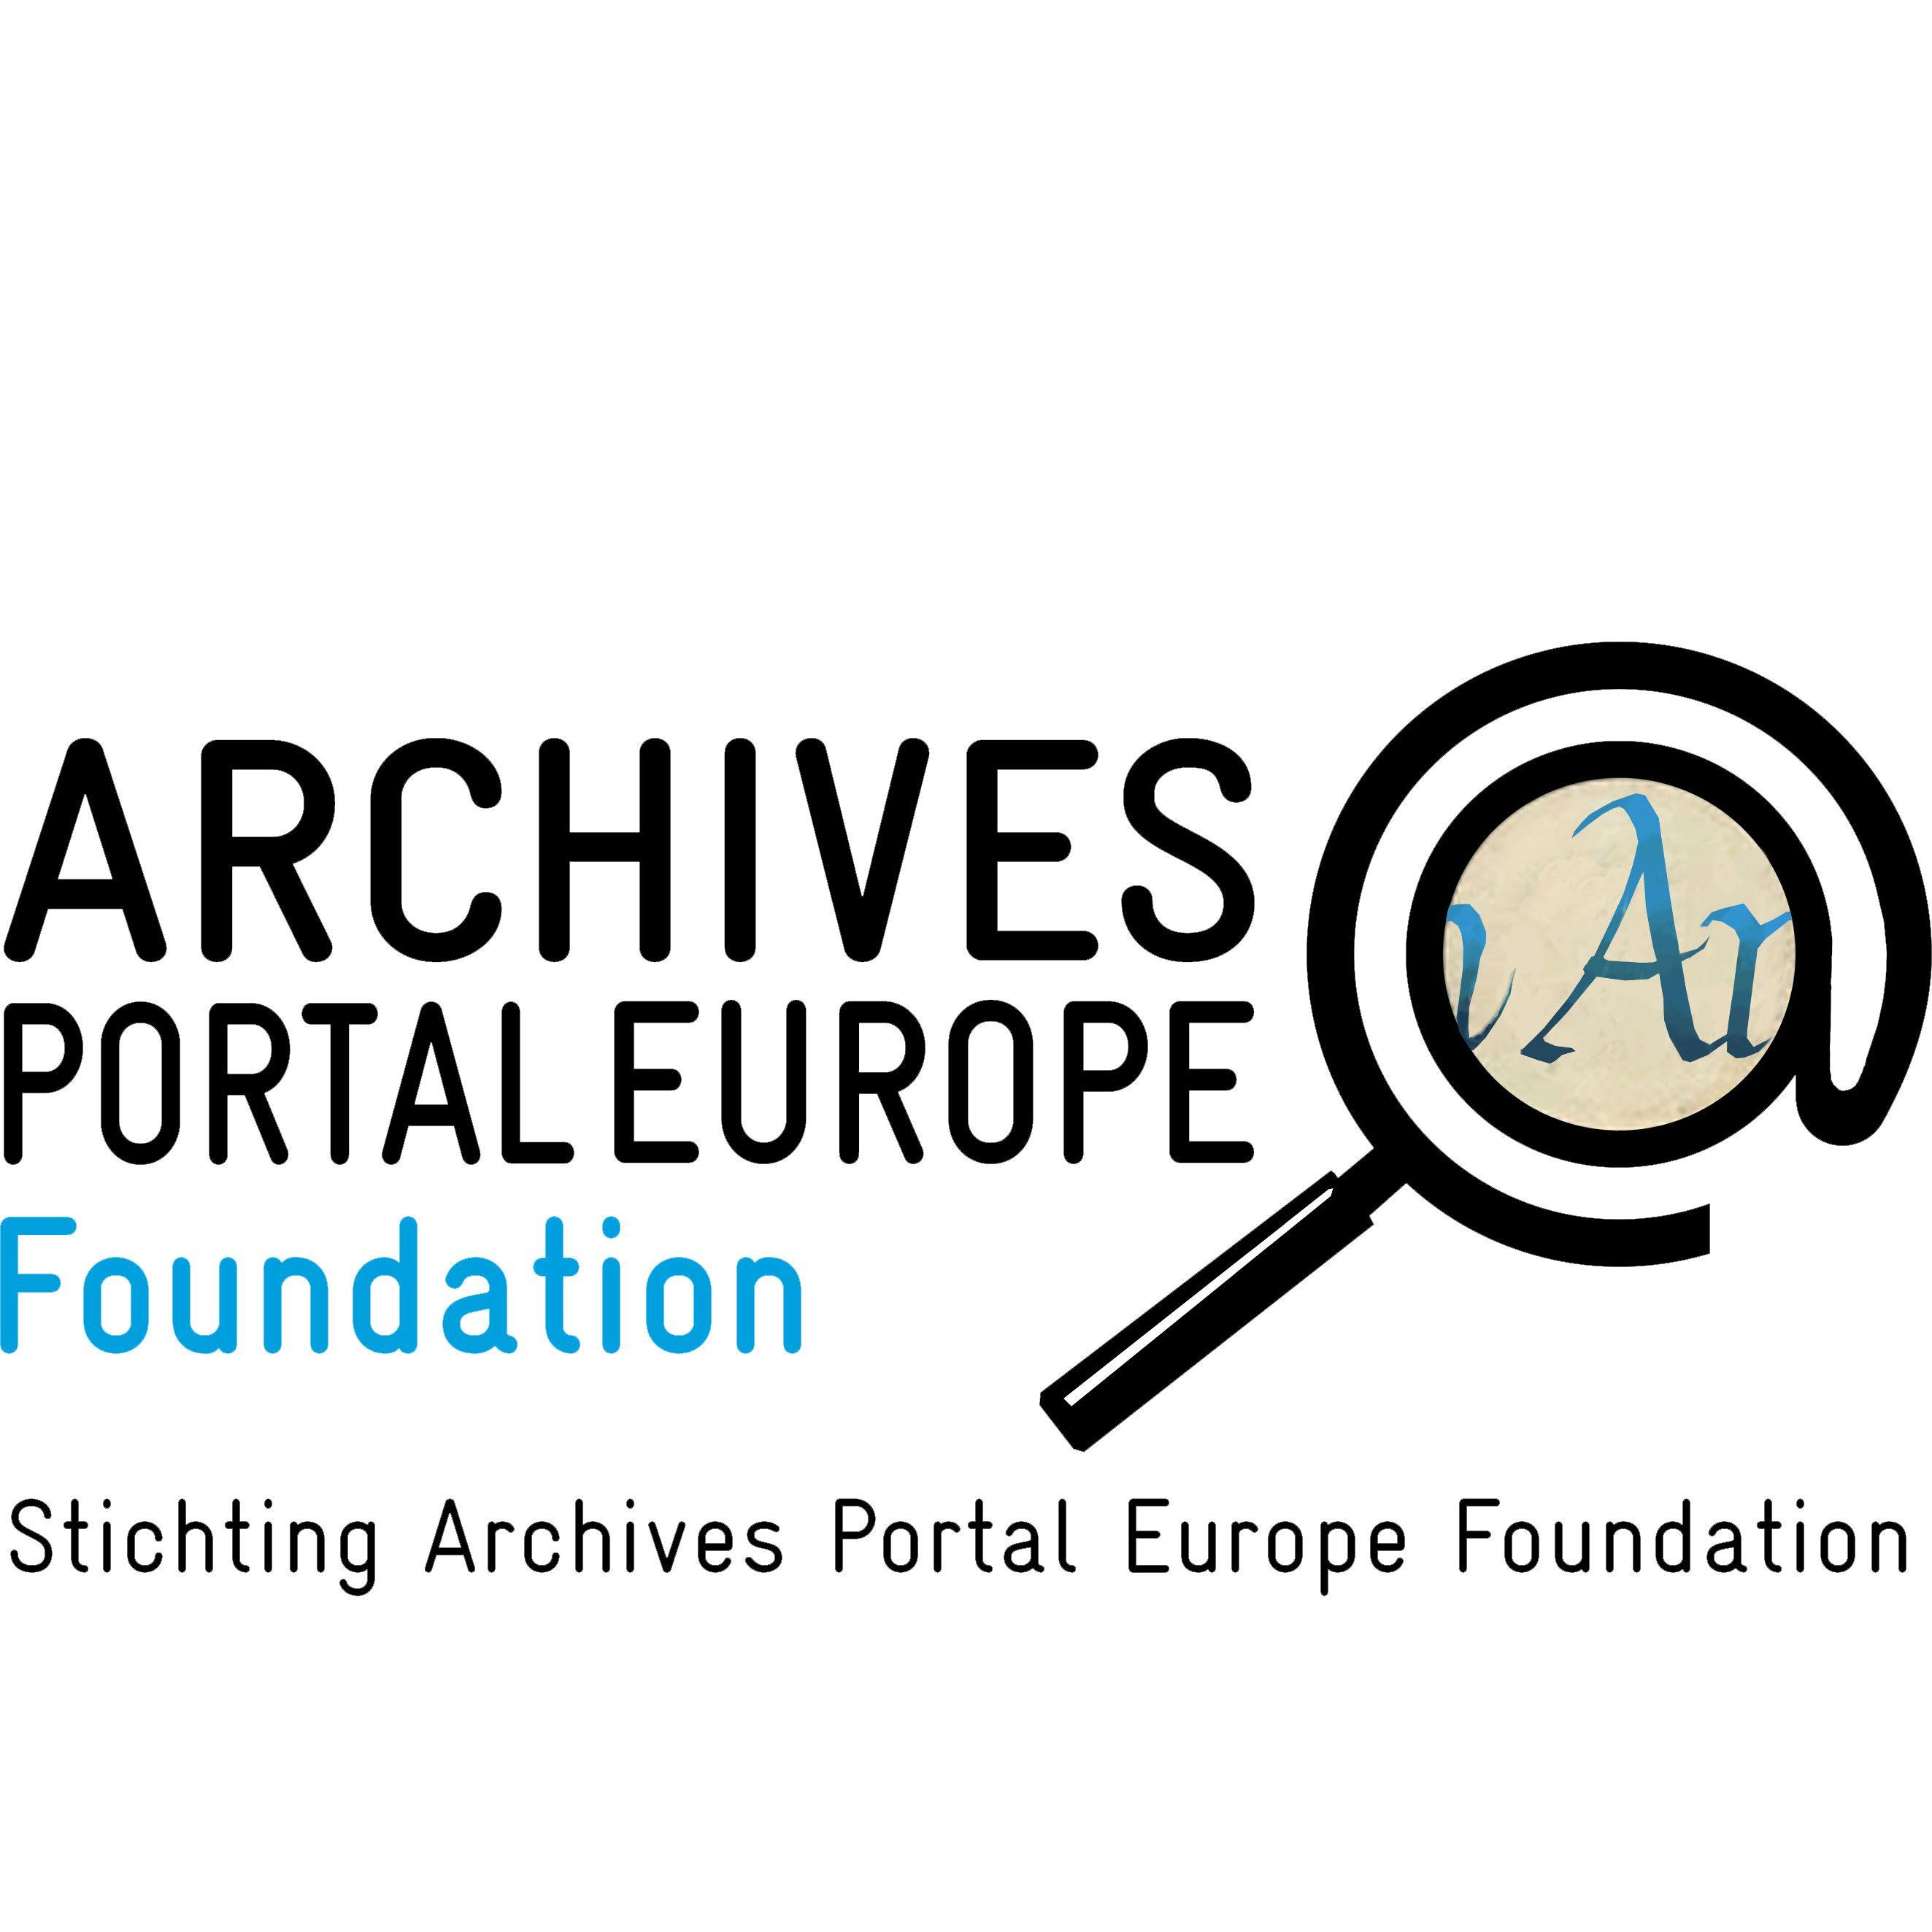 Archives Logo - Archives Portal Europe Foundation